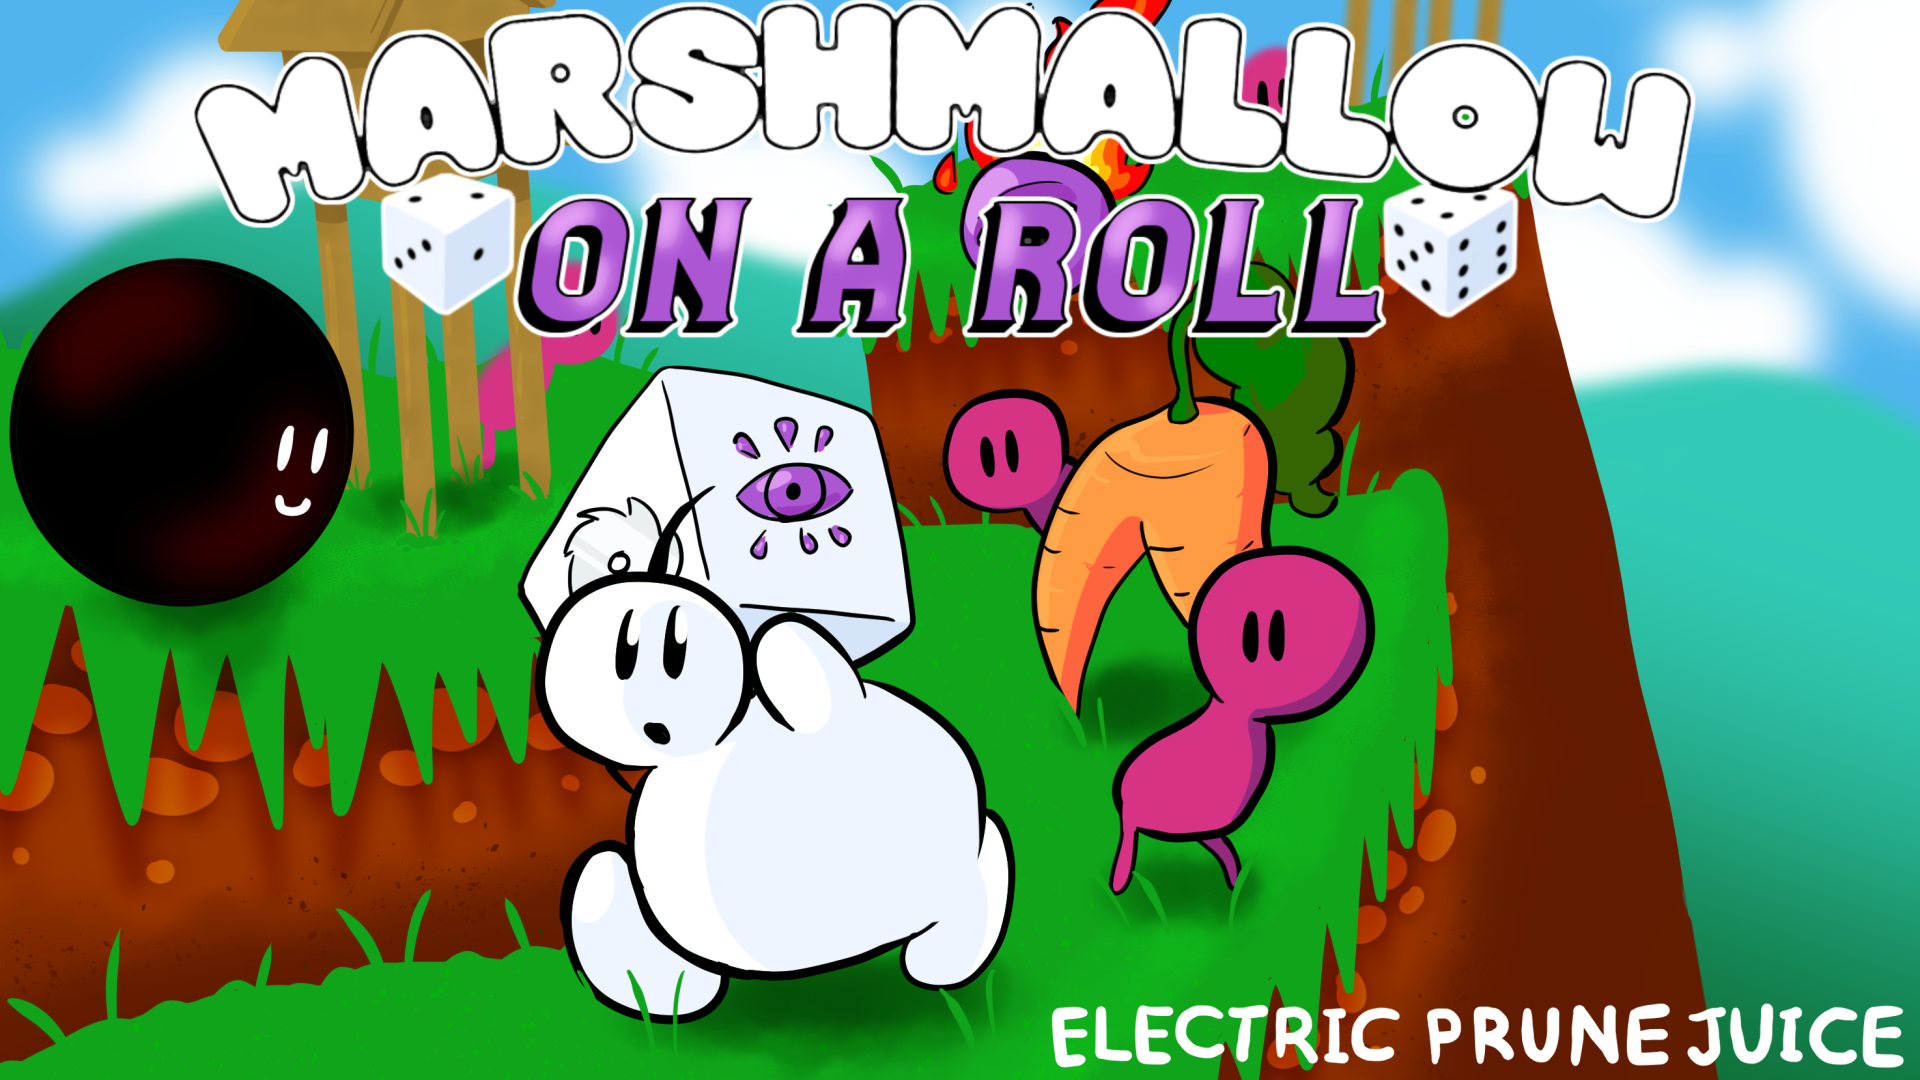 Marshmallow on a Roll